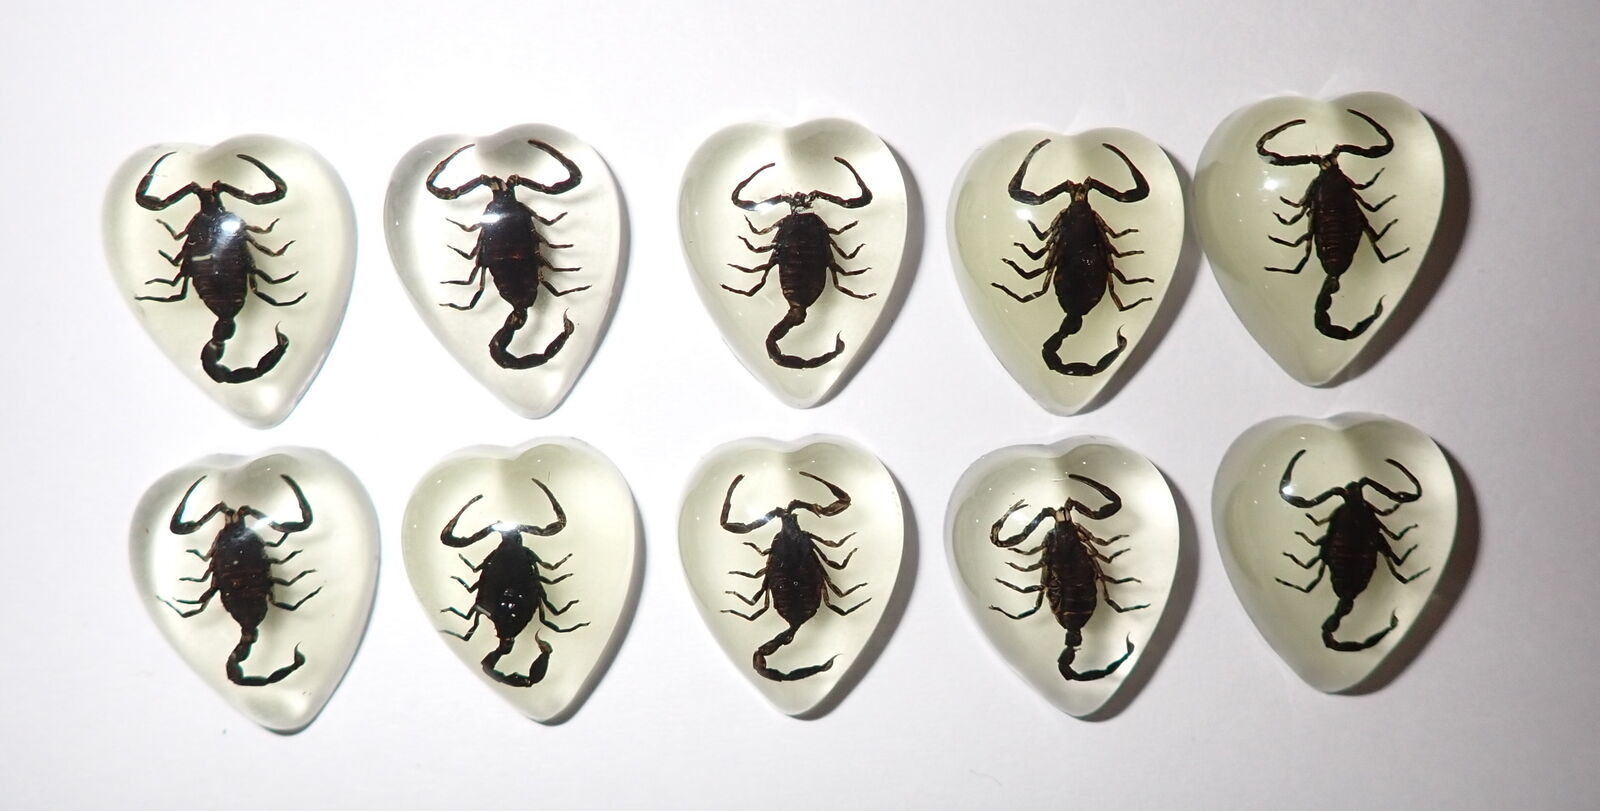 Insect Cabochon Black Scorpion Heart 17x21 mm Glow in the Dark 10 pieces Lot